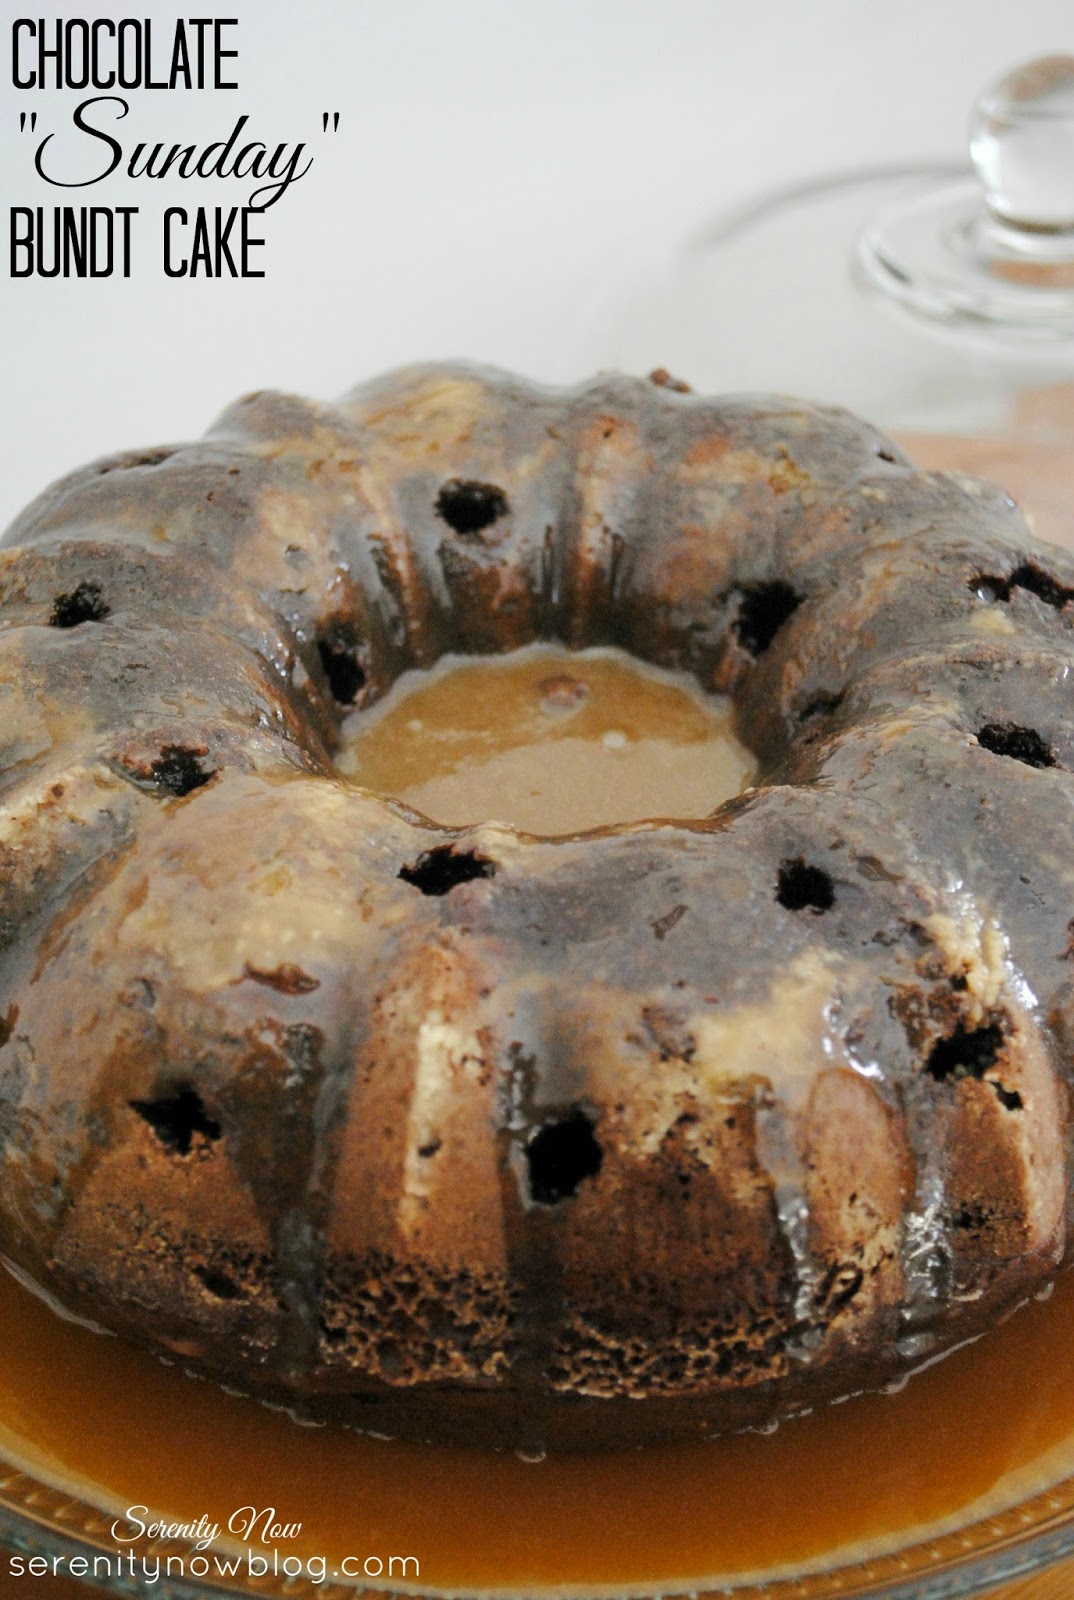 Chocolate "Sunday" Bundt Cake from Serenity Now- so sinful you'll need to go to church on Sunday!